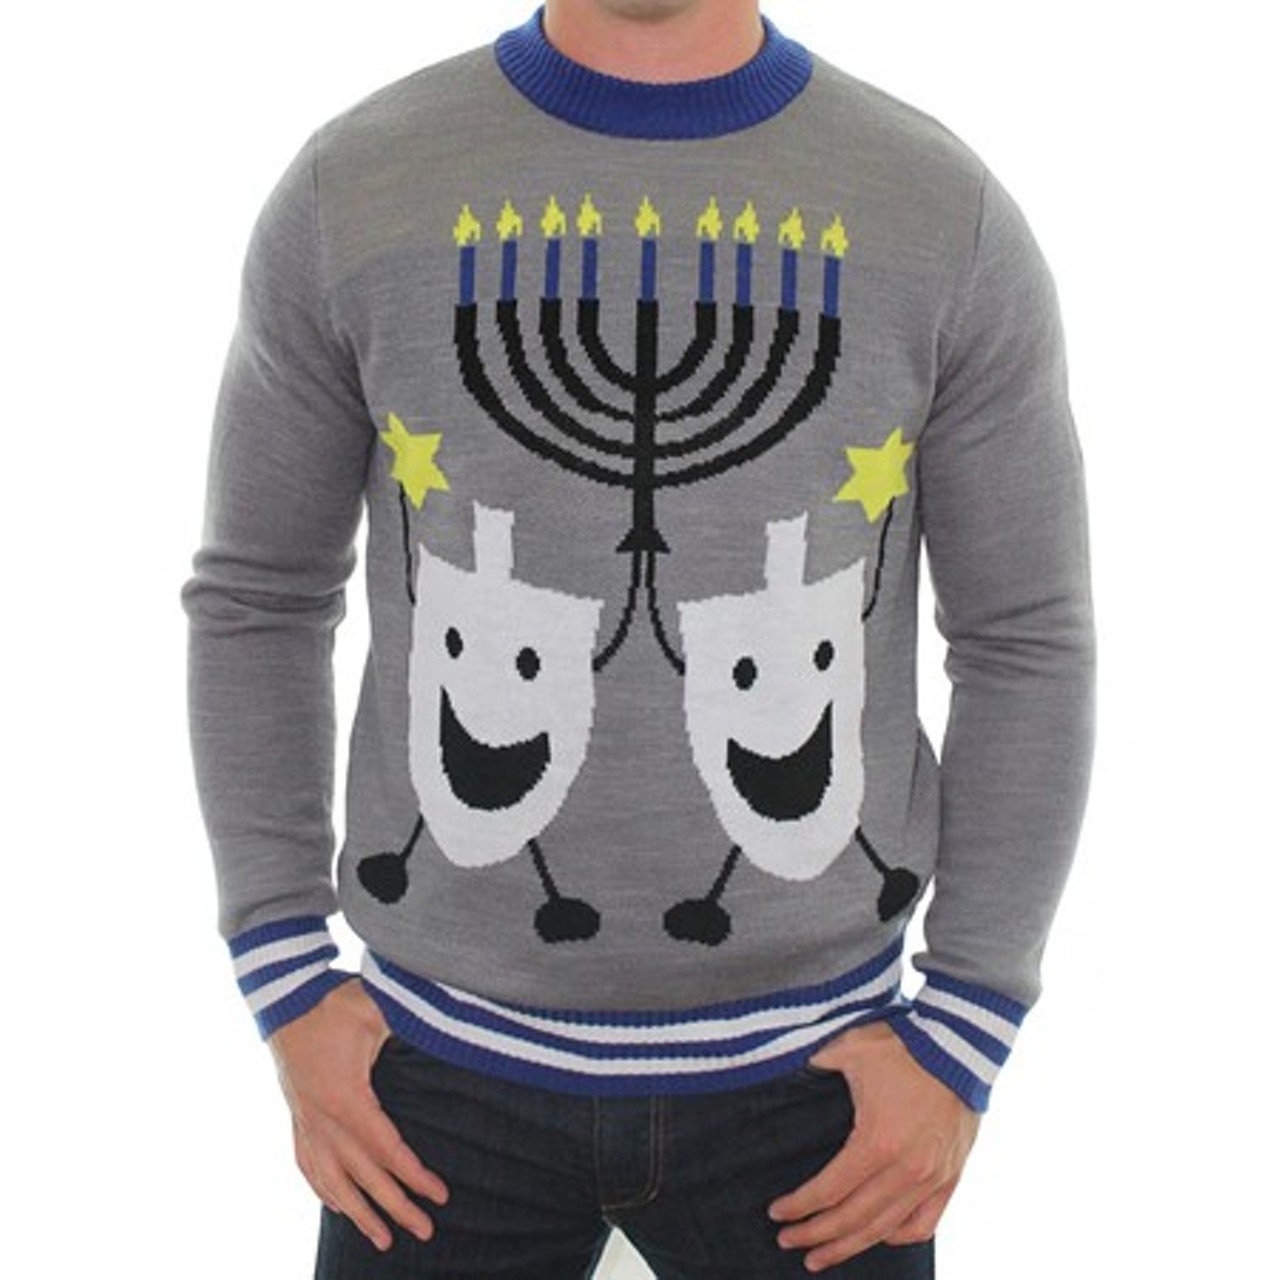 15 Hideously Tacky Holiday Sweaters We Hope to See This Season